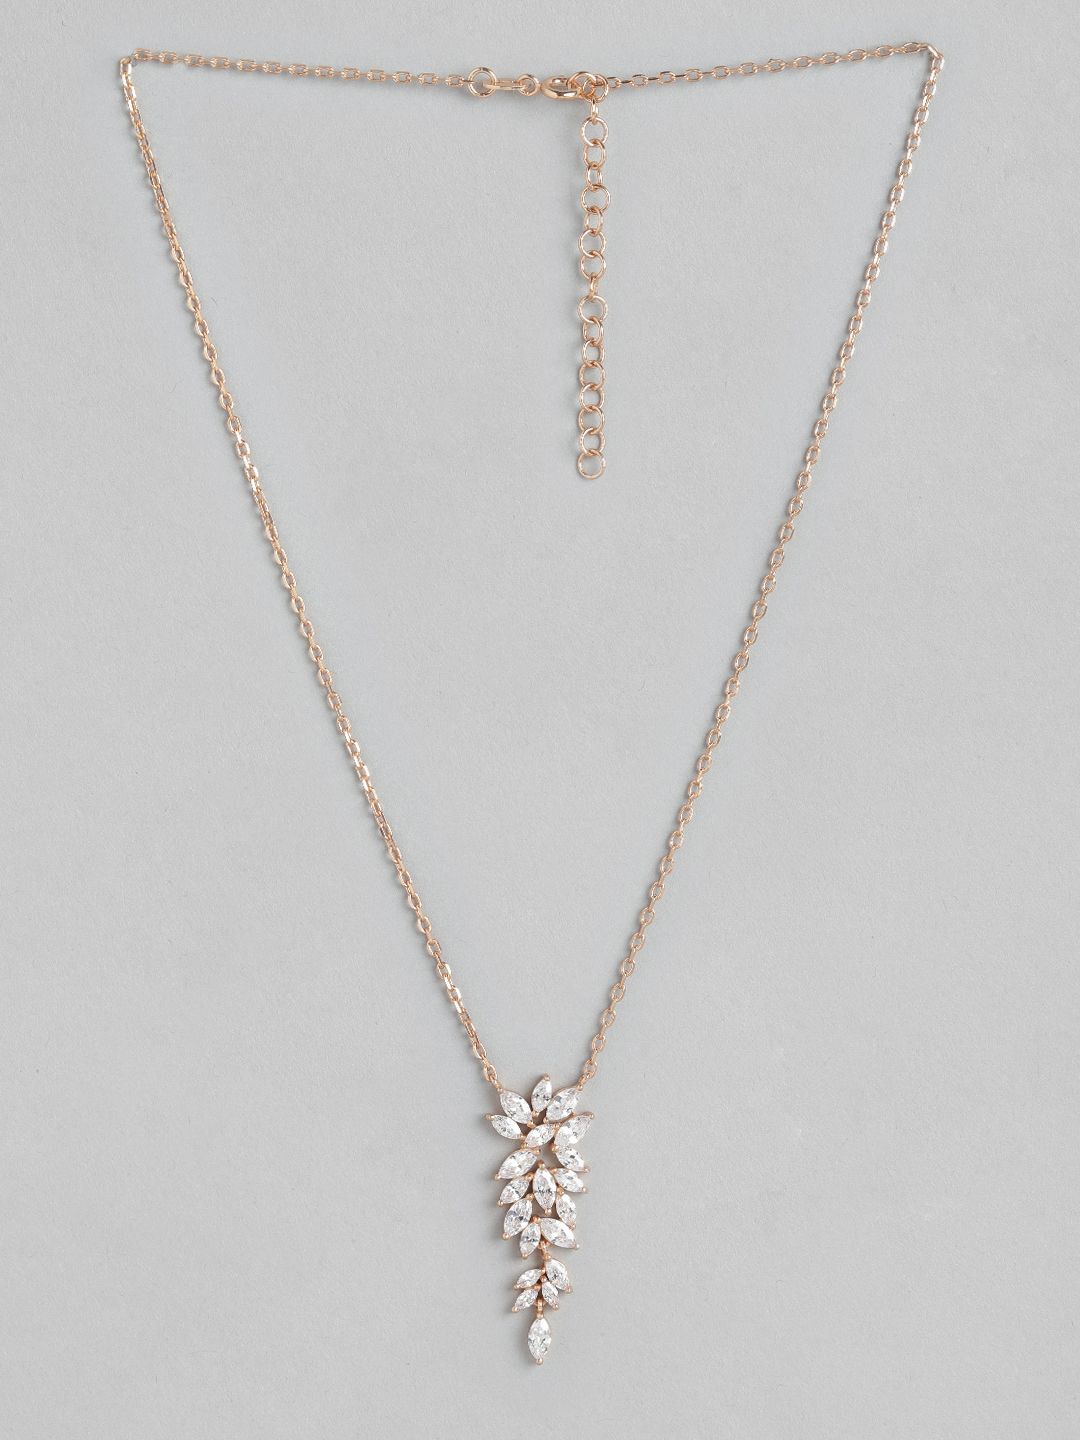 Carlton London Rose Gold-Plated CZ Studded Floral Textured Link Necklace Price in India